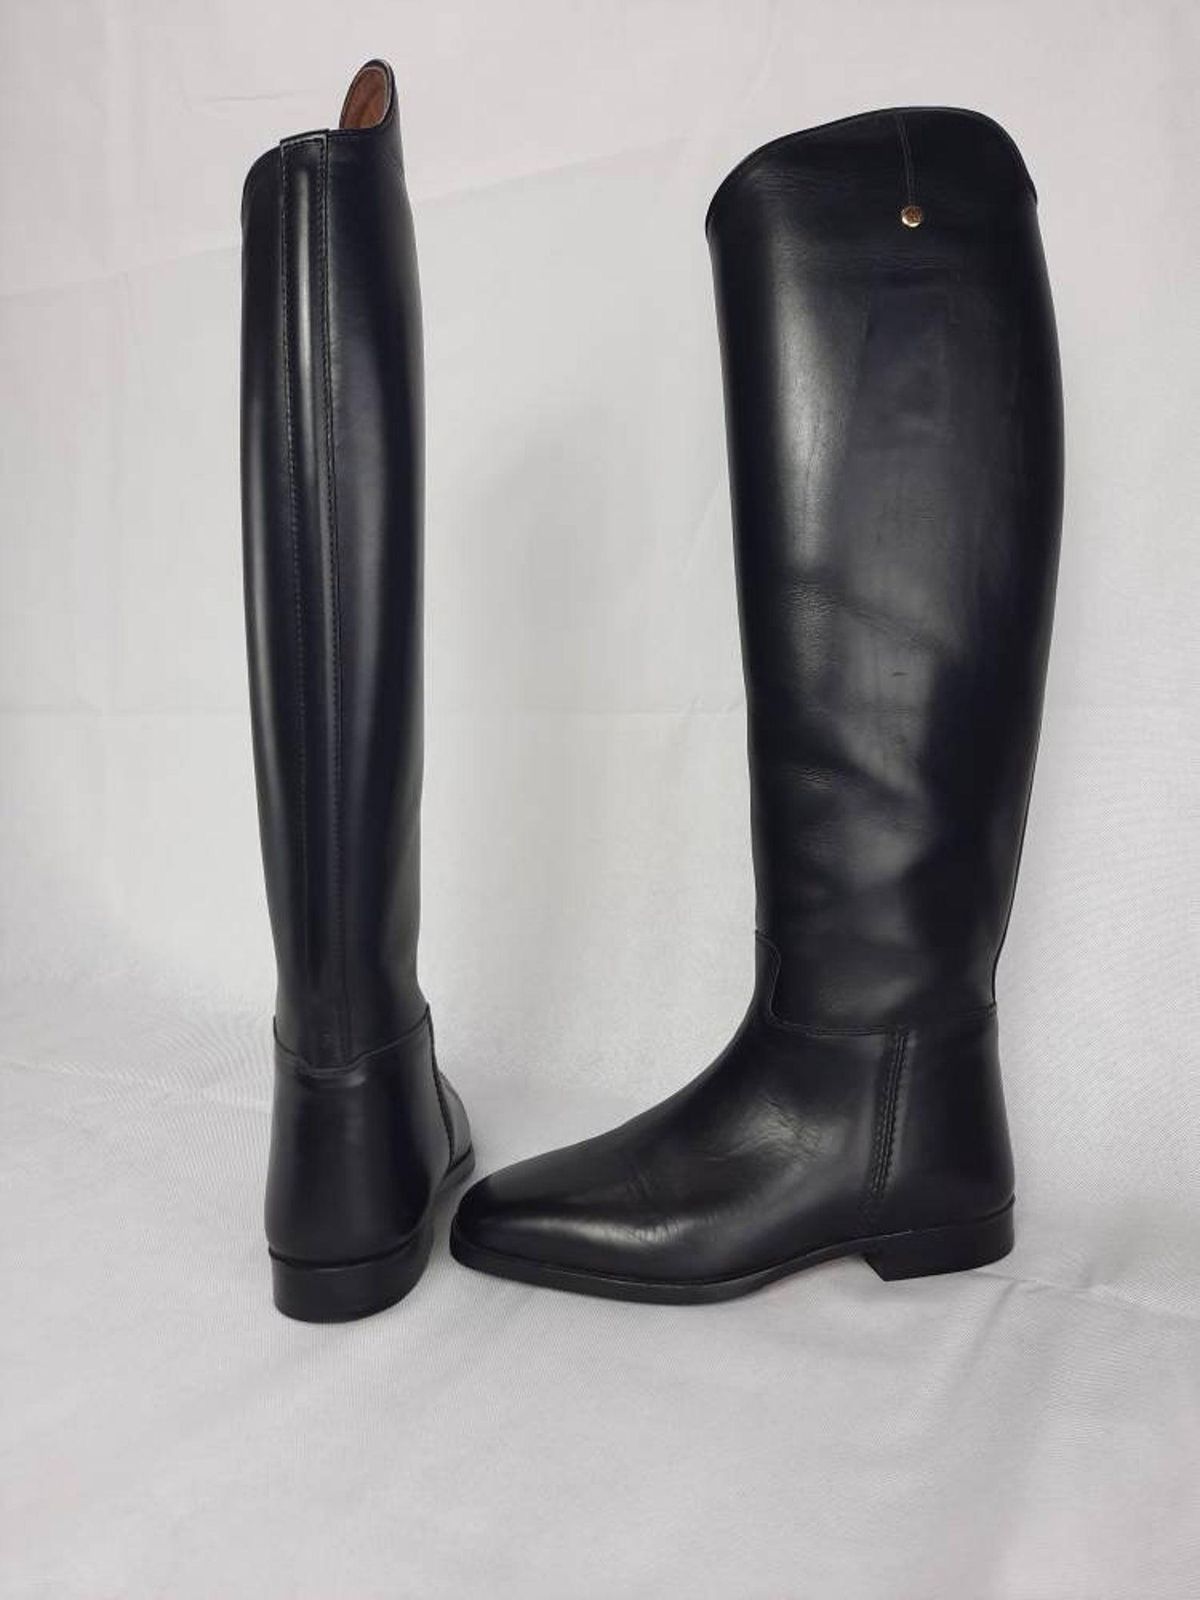 Long Leather Riding Boots